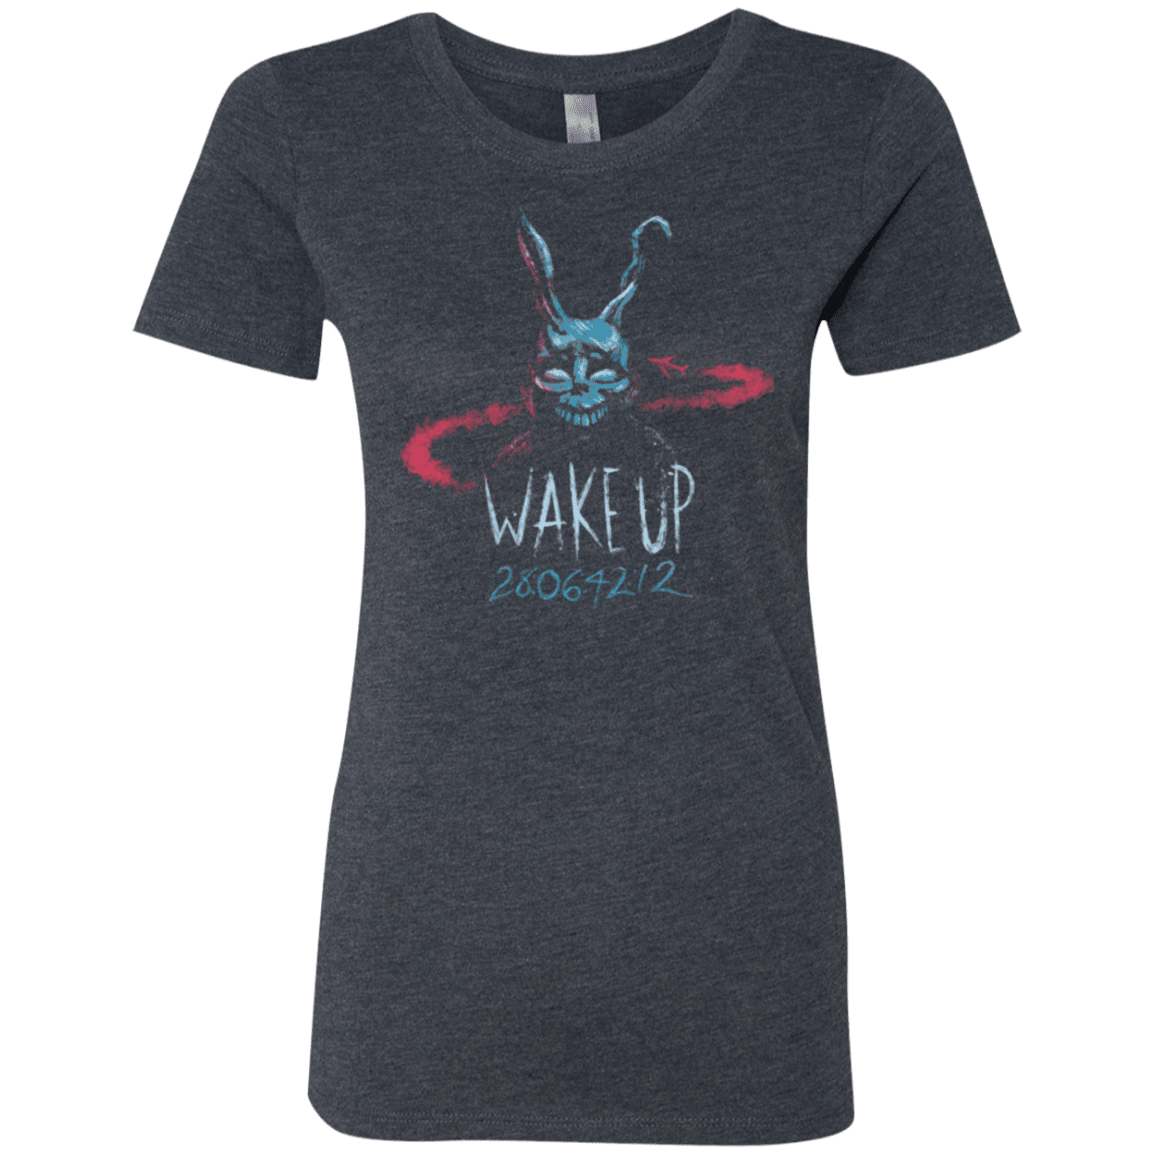 T-Shirts Vintage Navy / Small Wake up 28064212 Women's Triblend T-Shirt